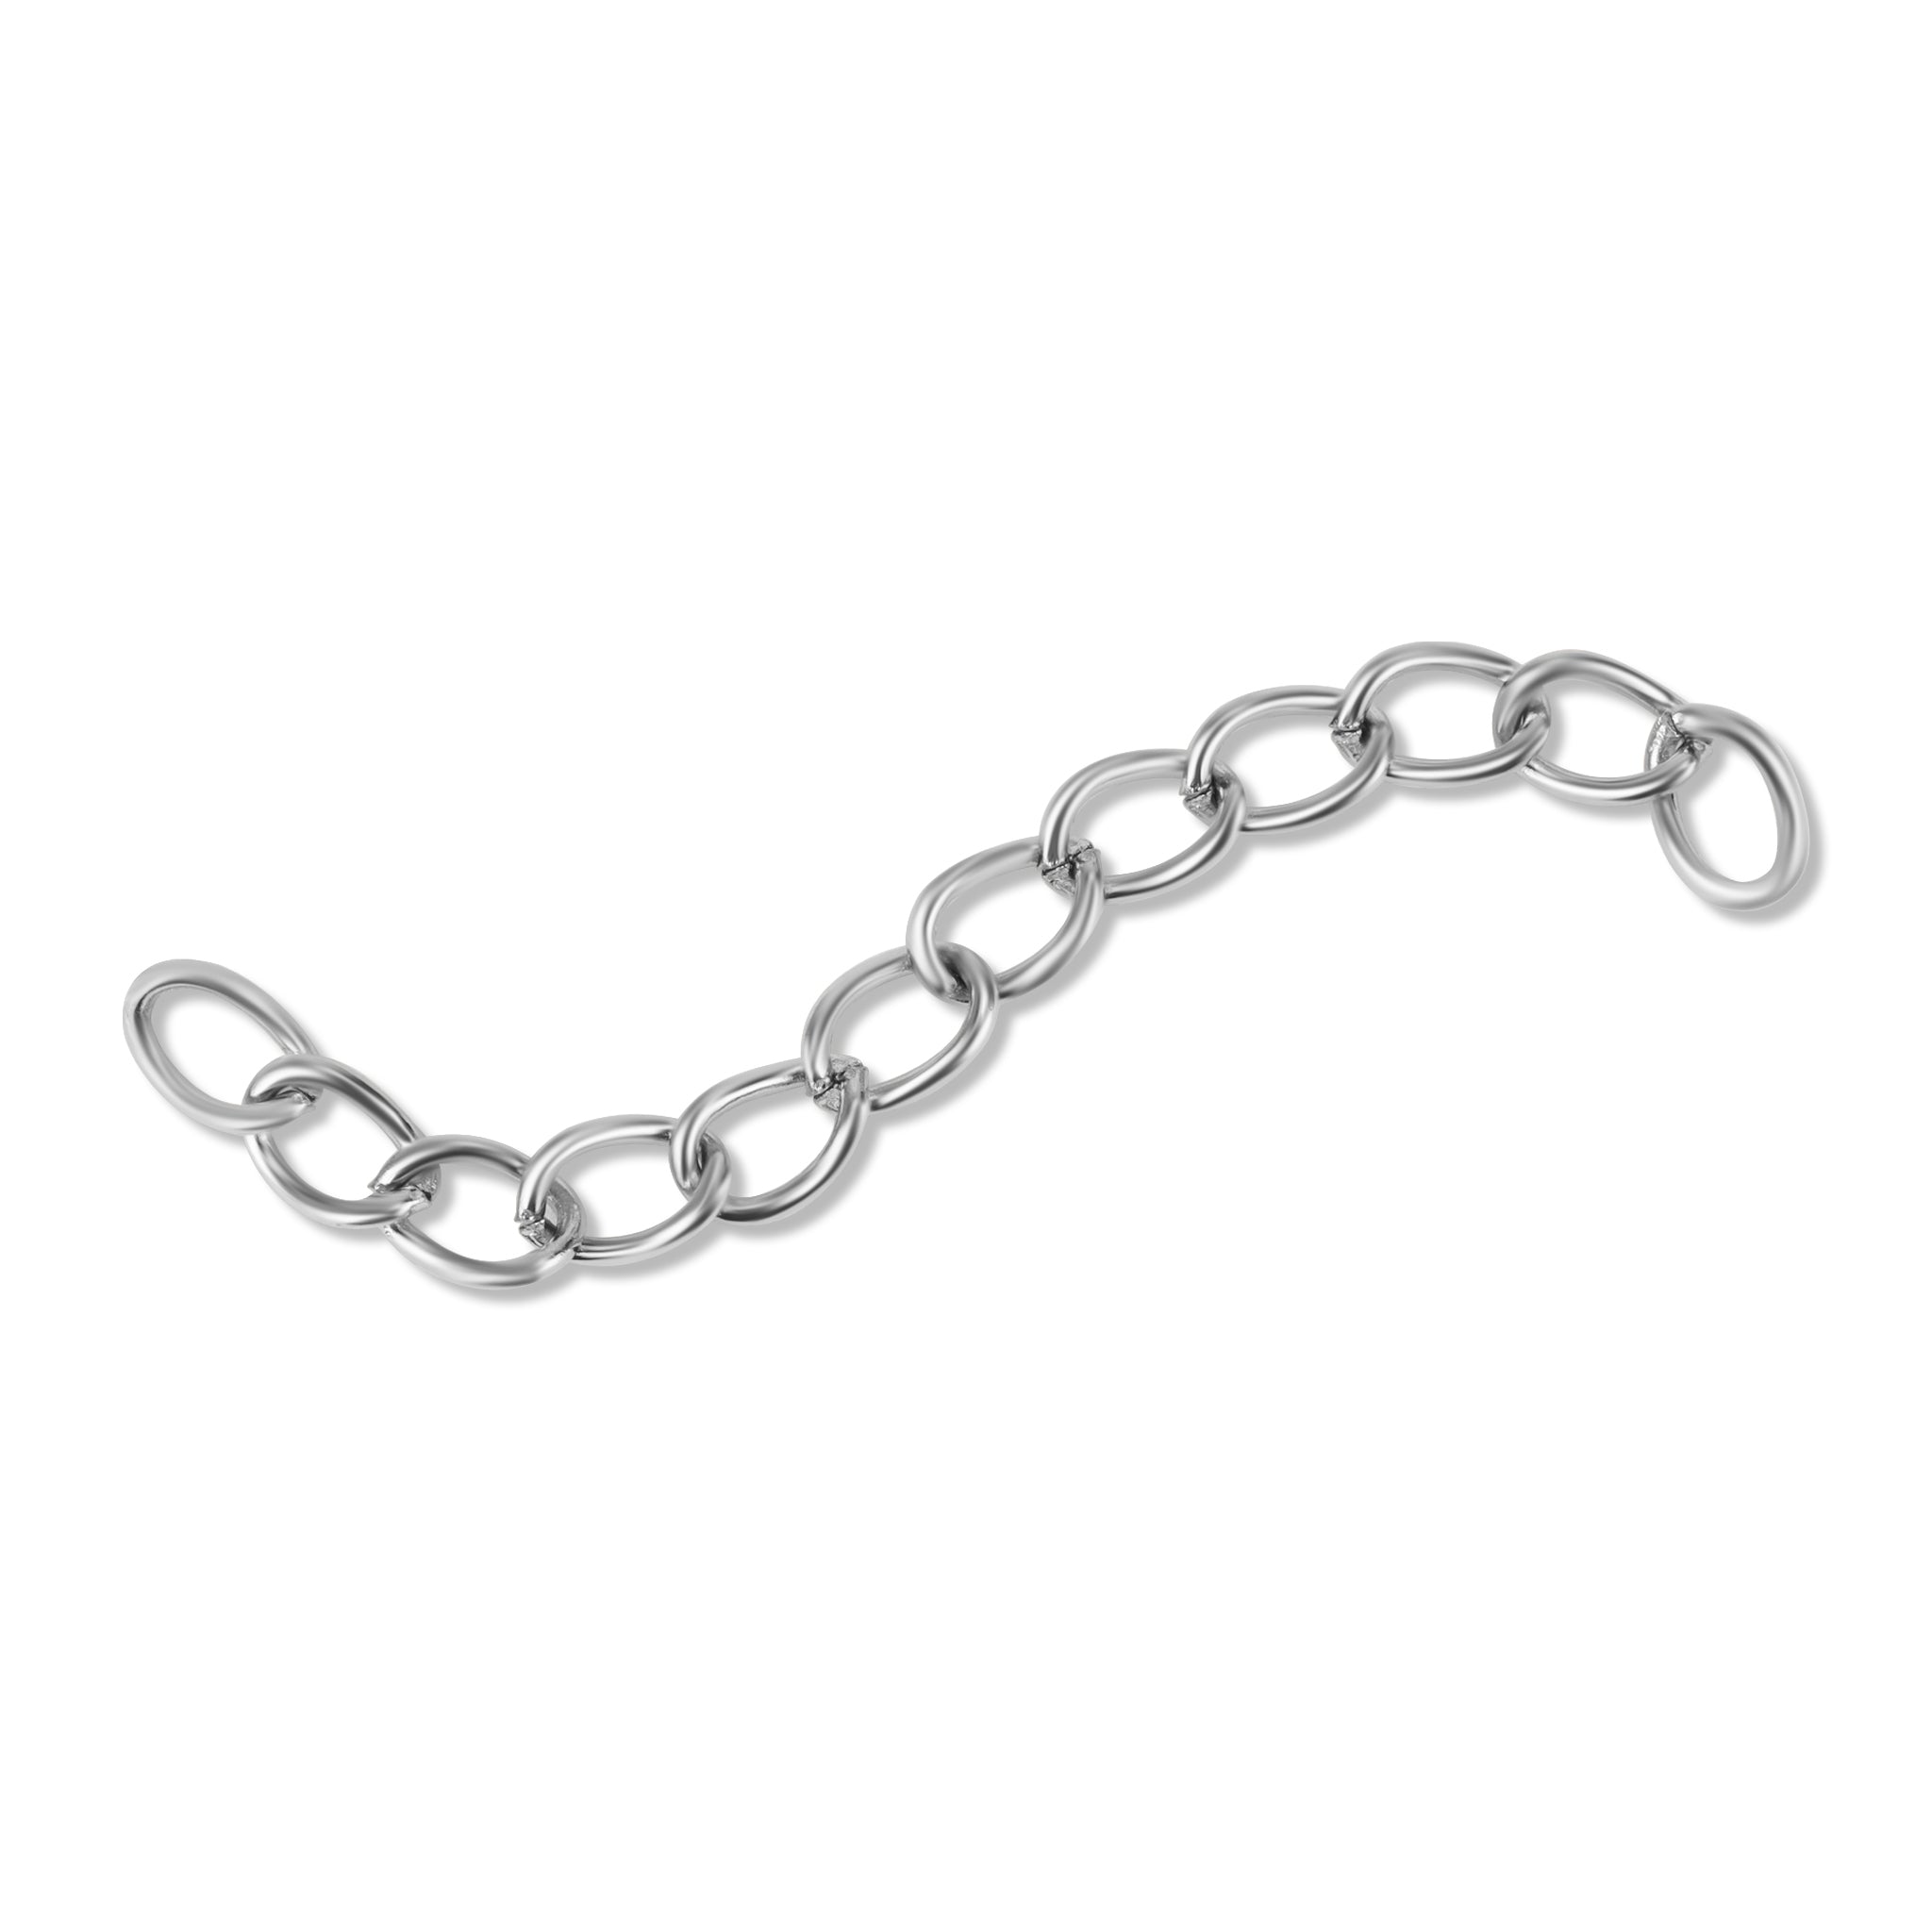 4x3mm 50pcs/lot 5 7cm Stainless Steel Bulk Necklace Extension Chain Tail  Extender Bracelet Chains for Jewelry Making Findings 